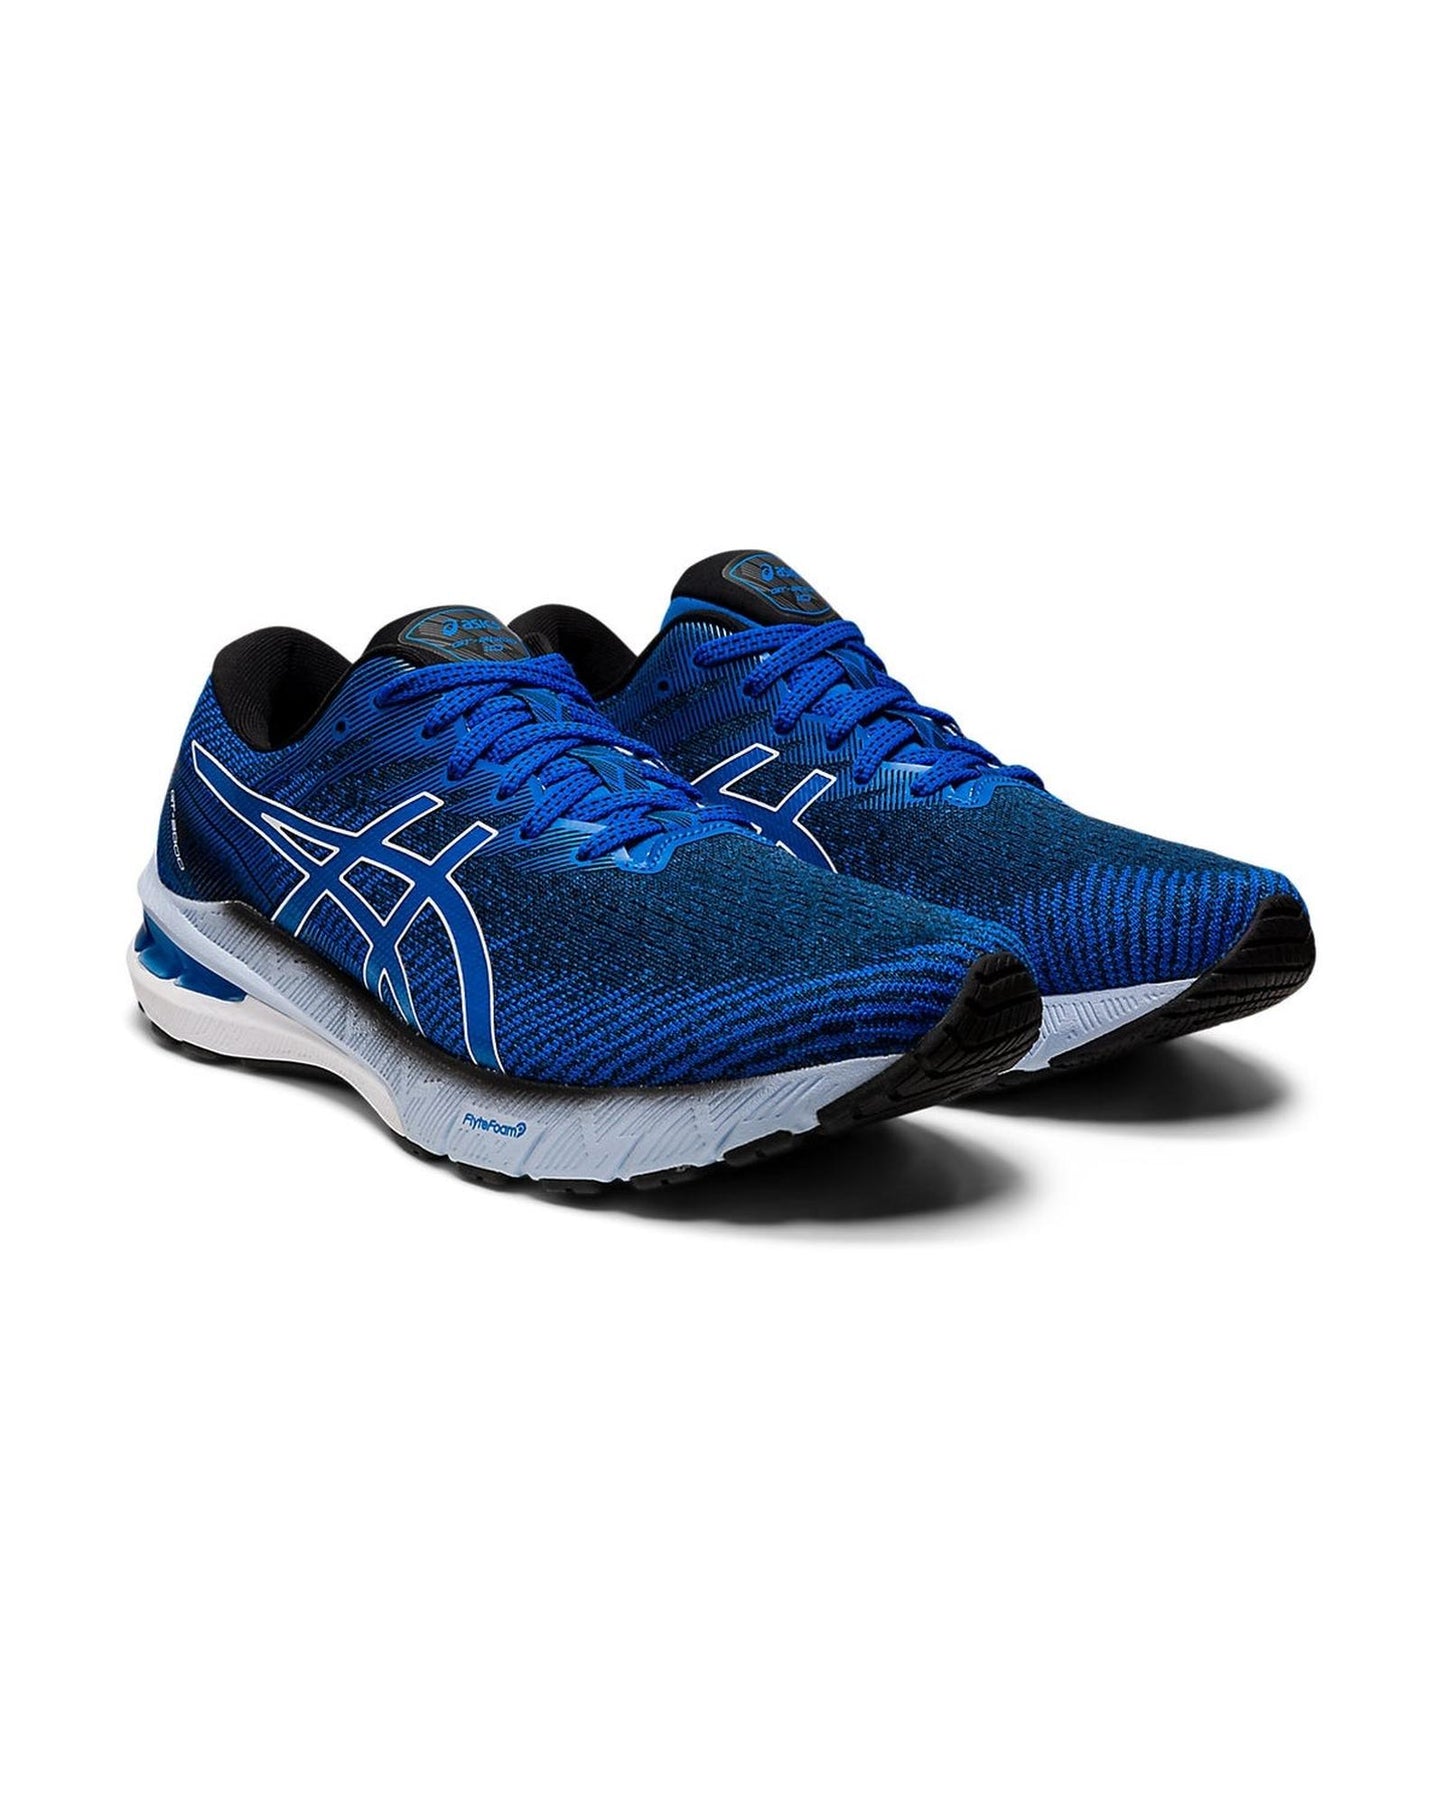 Versatile Knit Running Shoes with Advanced Cushioning - 10 US